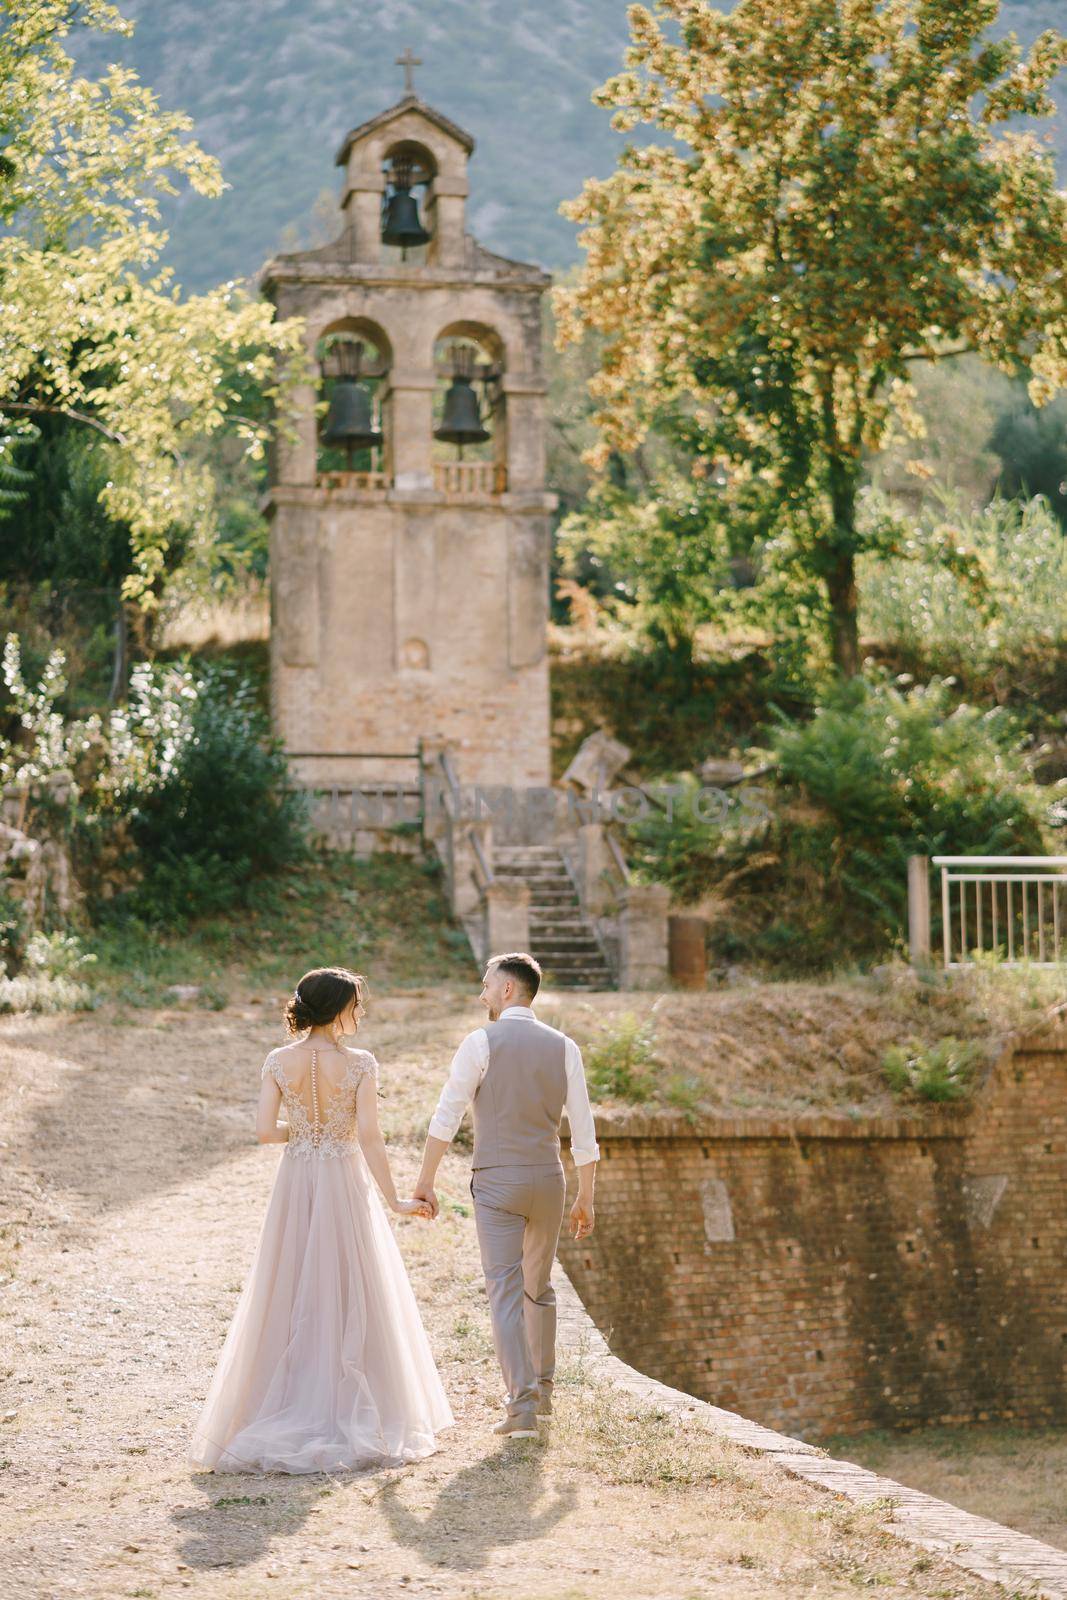 Groom and bride go to a small chapel in the garden of an old villa by Nadtochiy